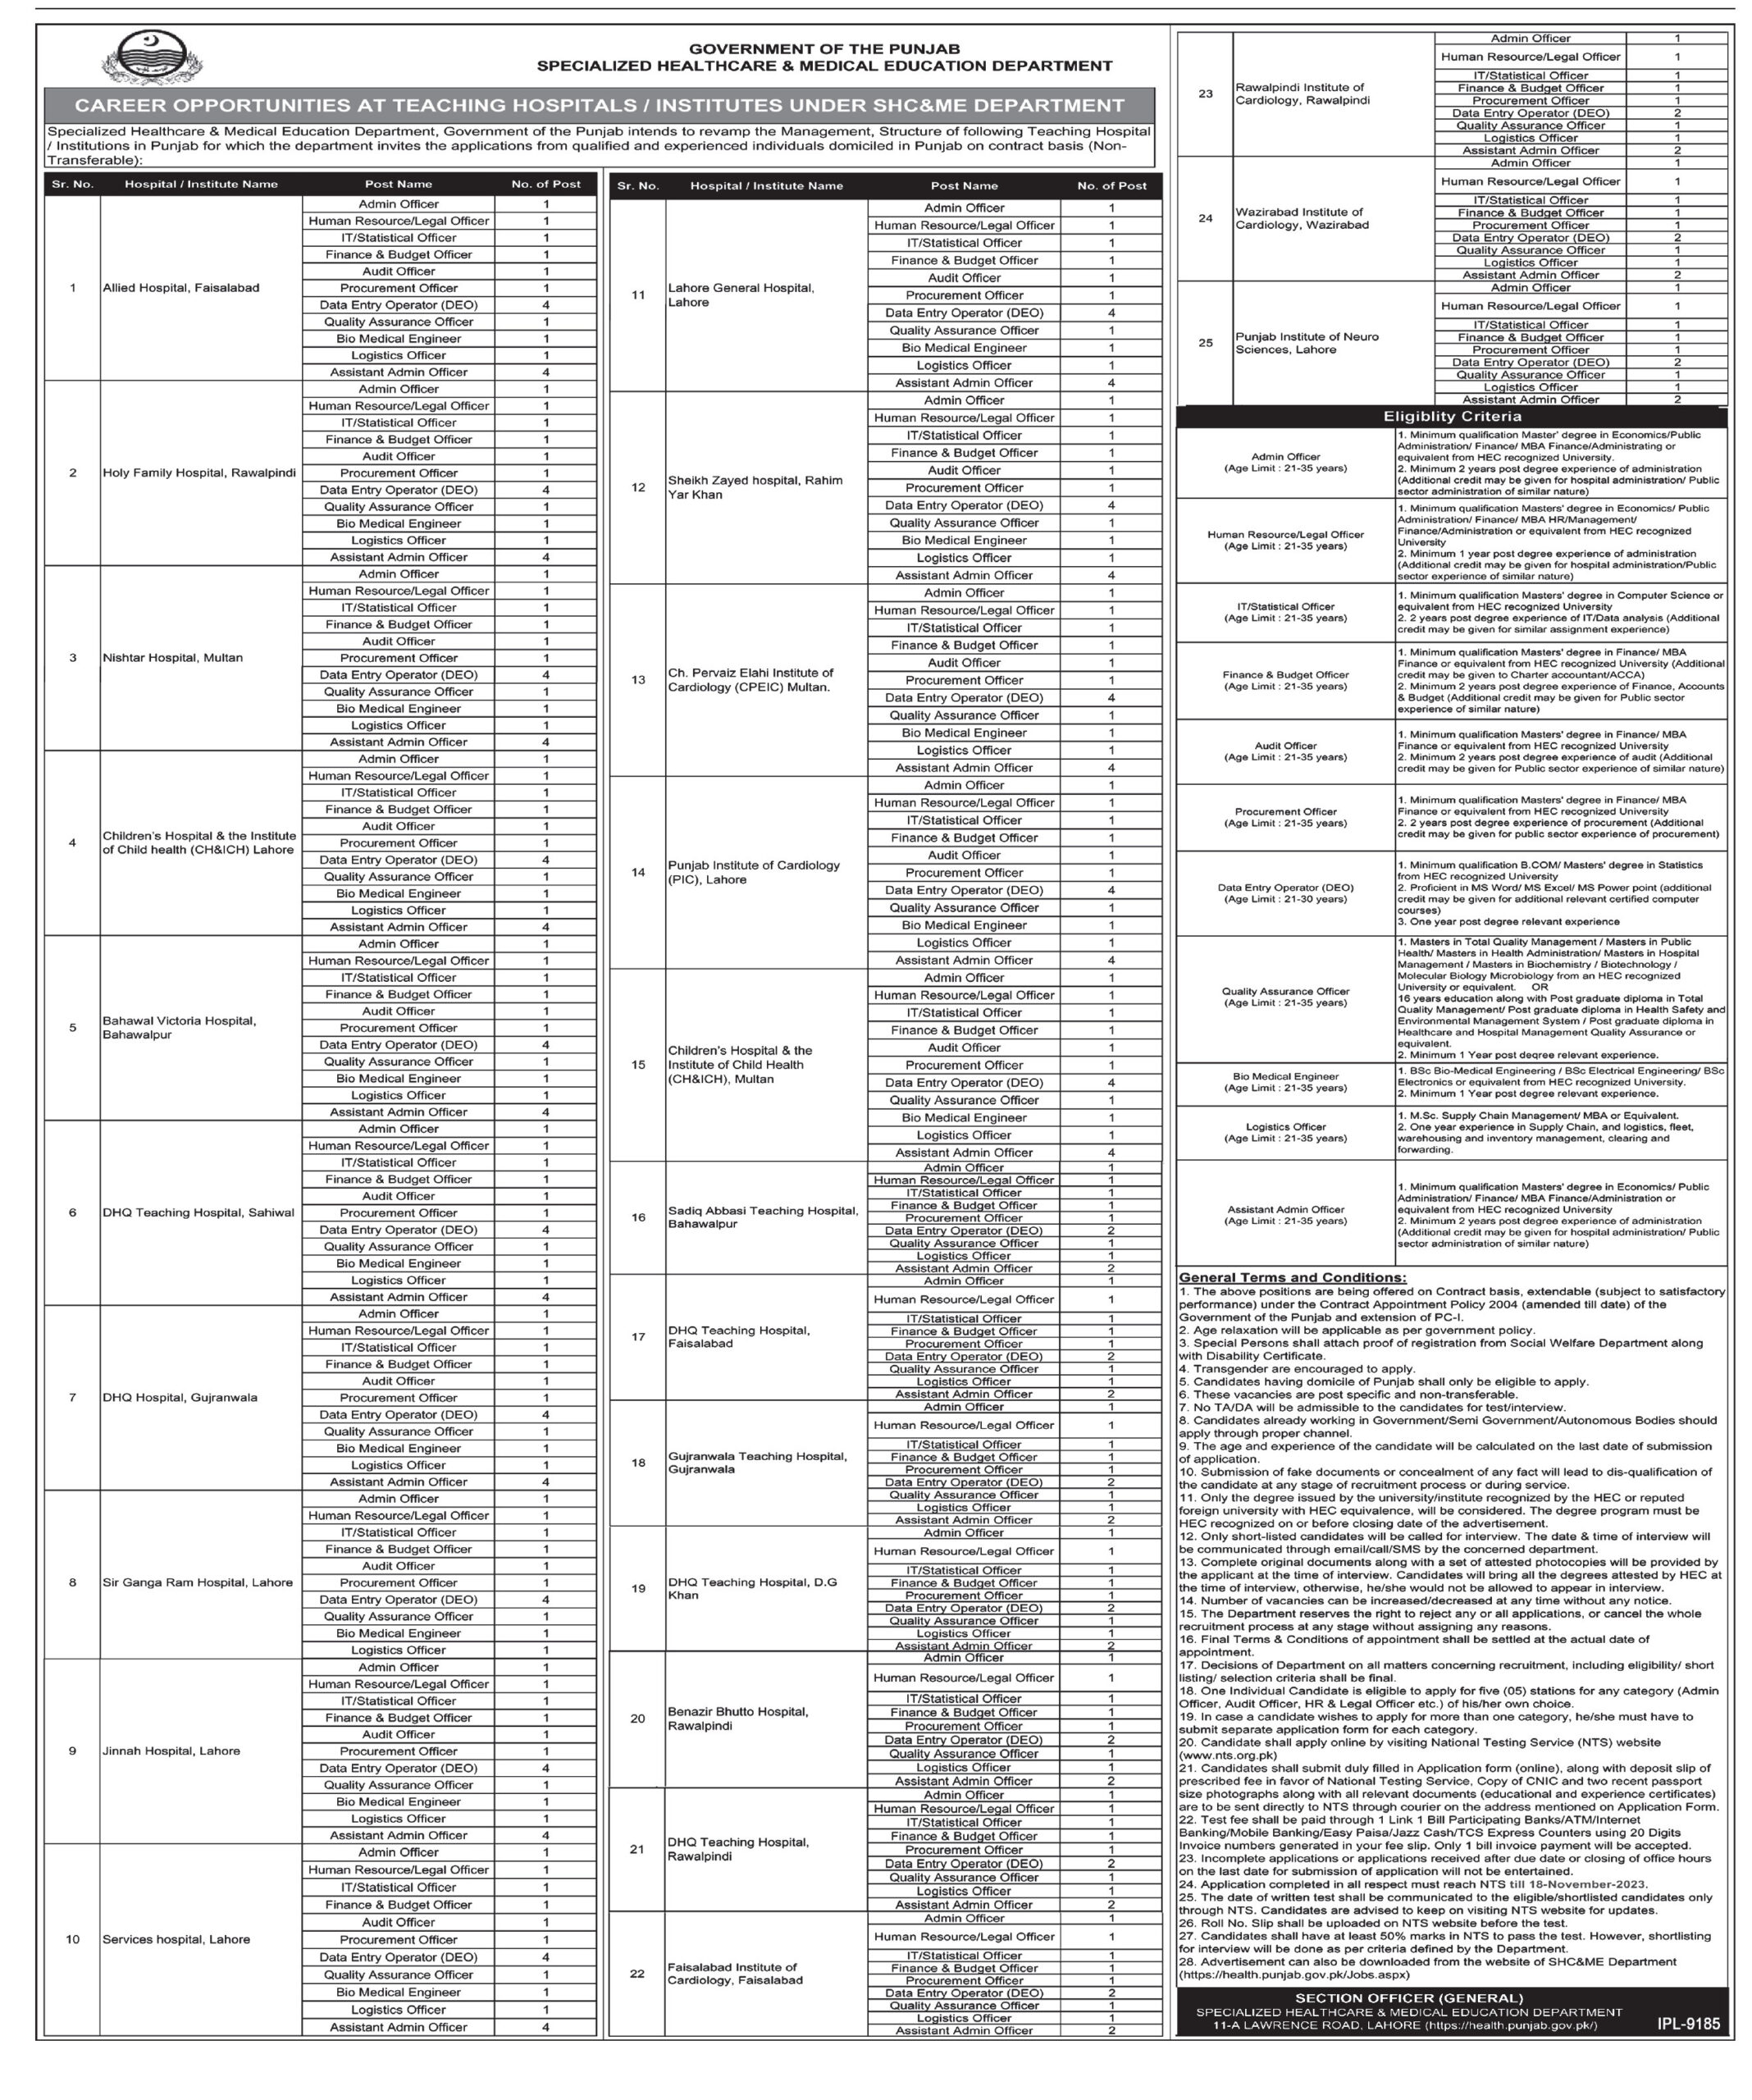 Advertisement For Punjab Specialized Healthcare & Medical Education Department Jobs 2023